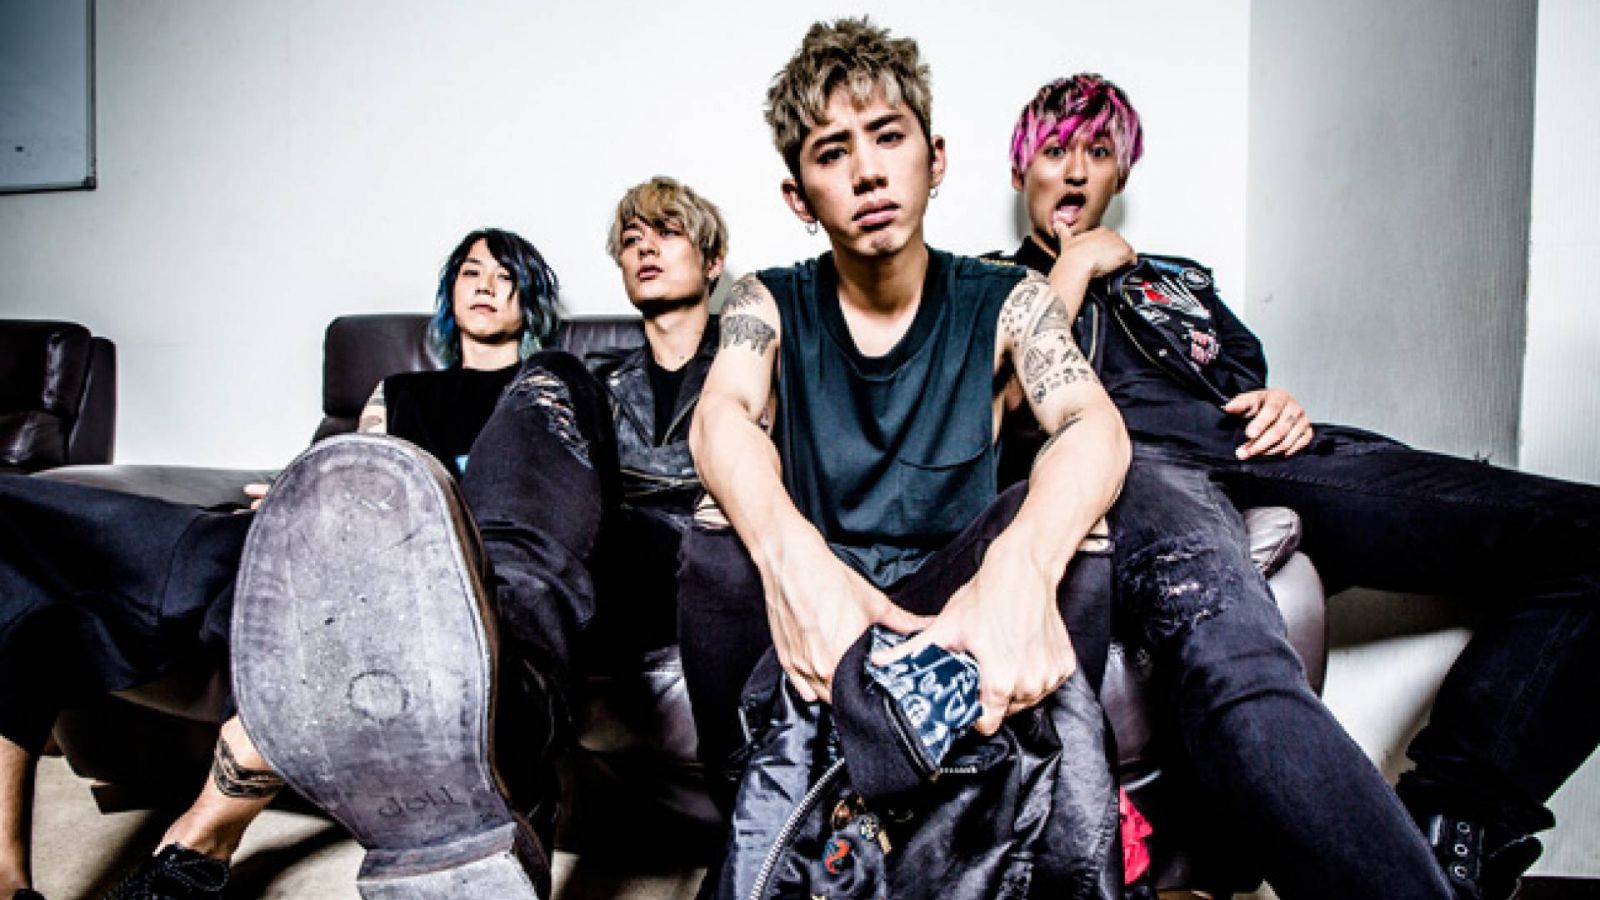 Gira mundial de ONE OK ROCK © AMUSE INC. All rights reserved.